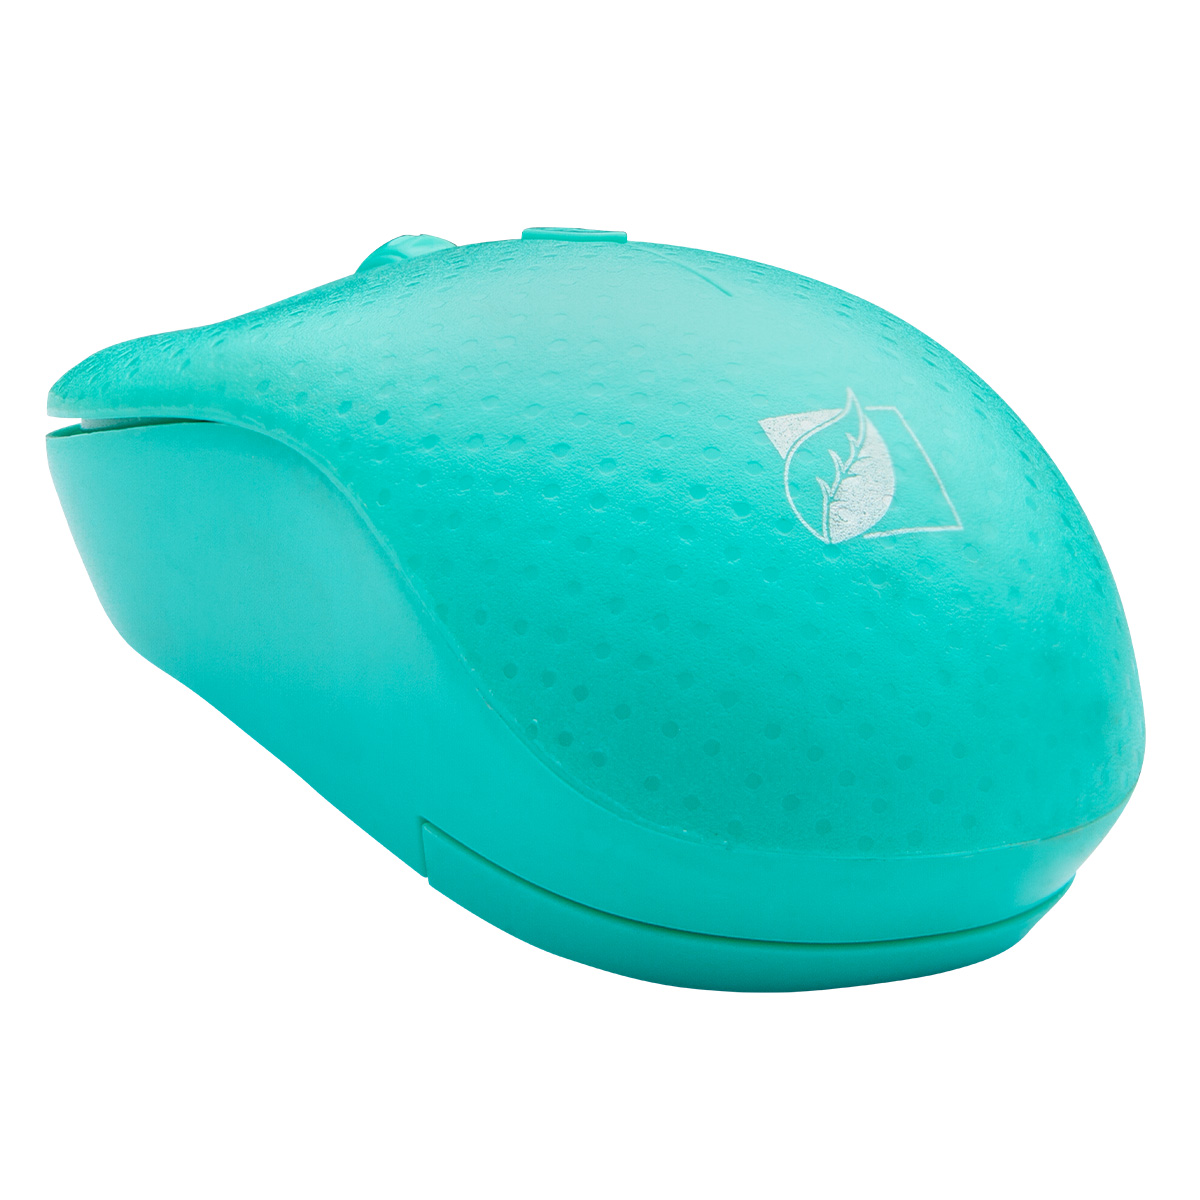 Mouse Inalámbrico Green Leaf Velocidad 1600 DPIs color azul 18-8855BL